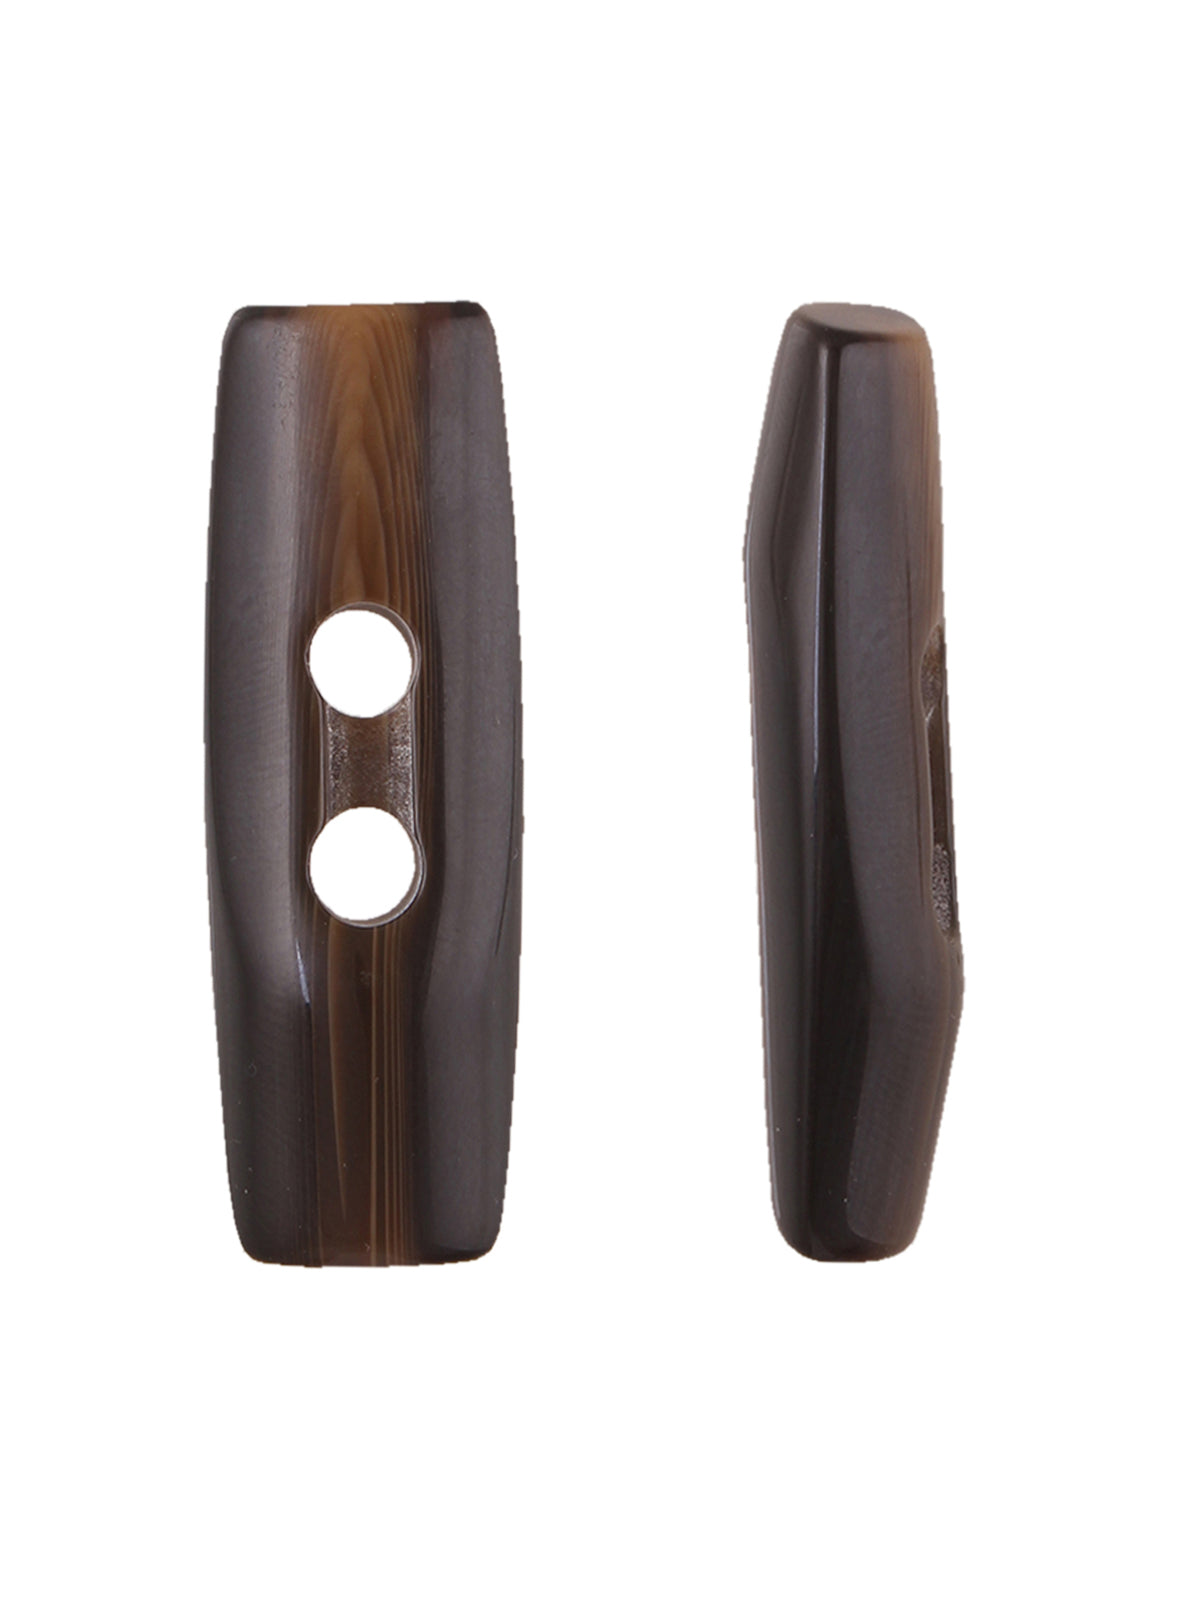 Imitation Horn 2-Hole Dark Brown Shaded Toggle Button